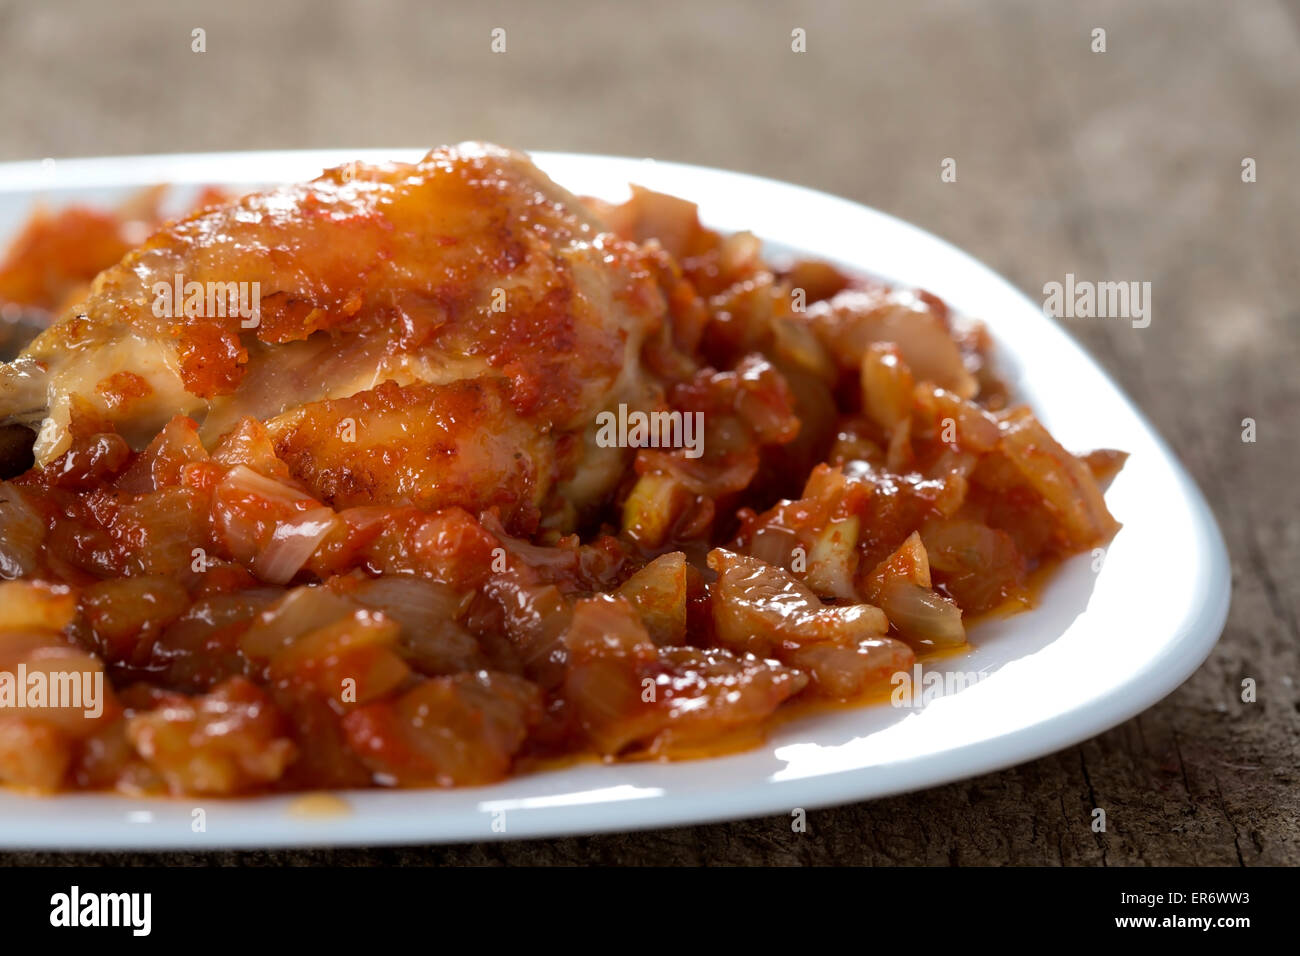 Chicken stew with onion sauce in white plate on wooden table Stock Photo